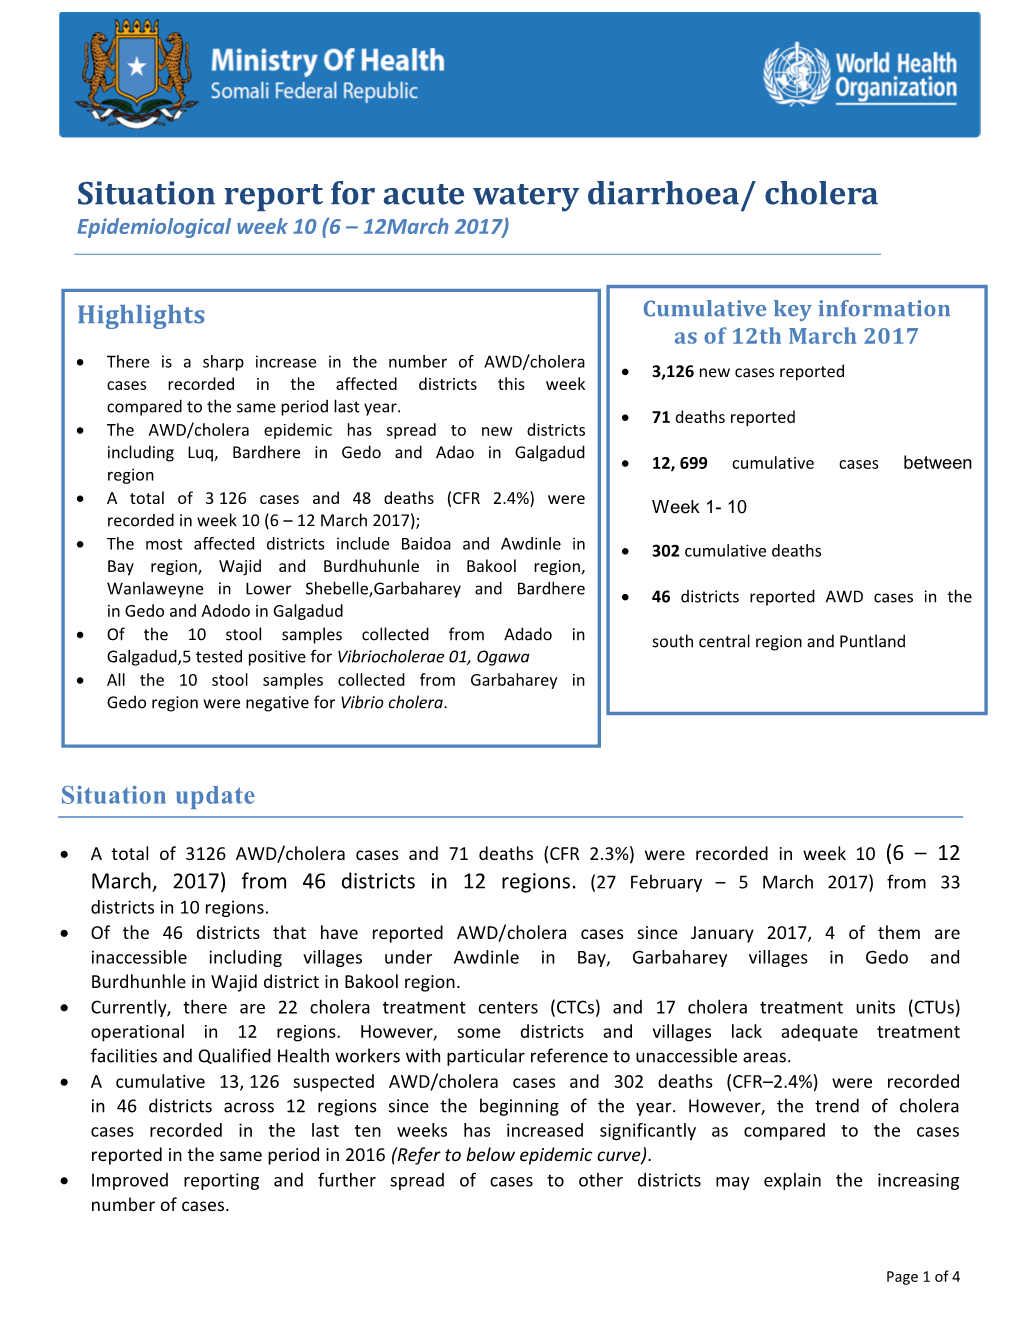 Situation Report for Acute Watery Diarrhoea/ Cholera Epidemiological Week 10 (6 – 12March 2017)